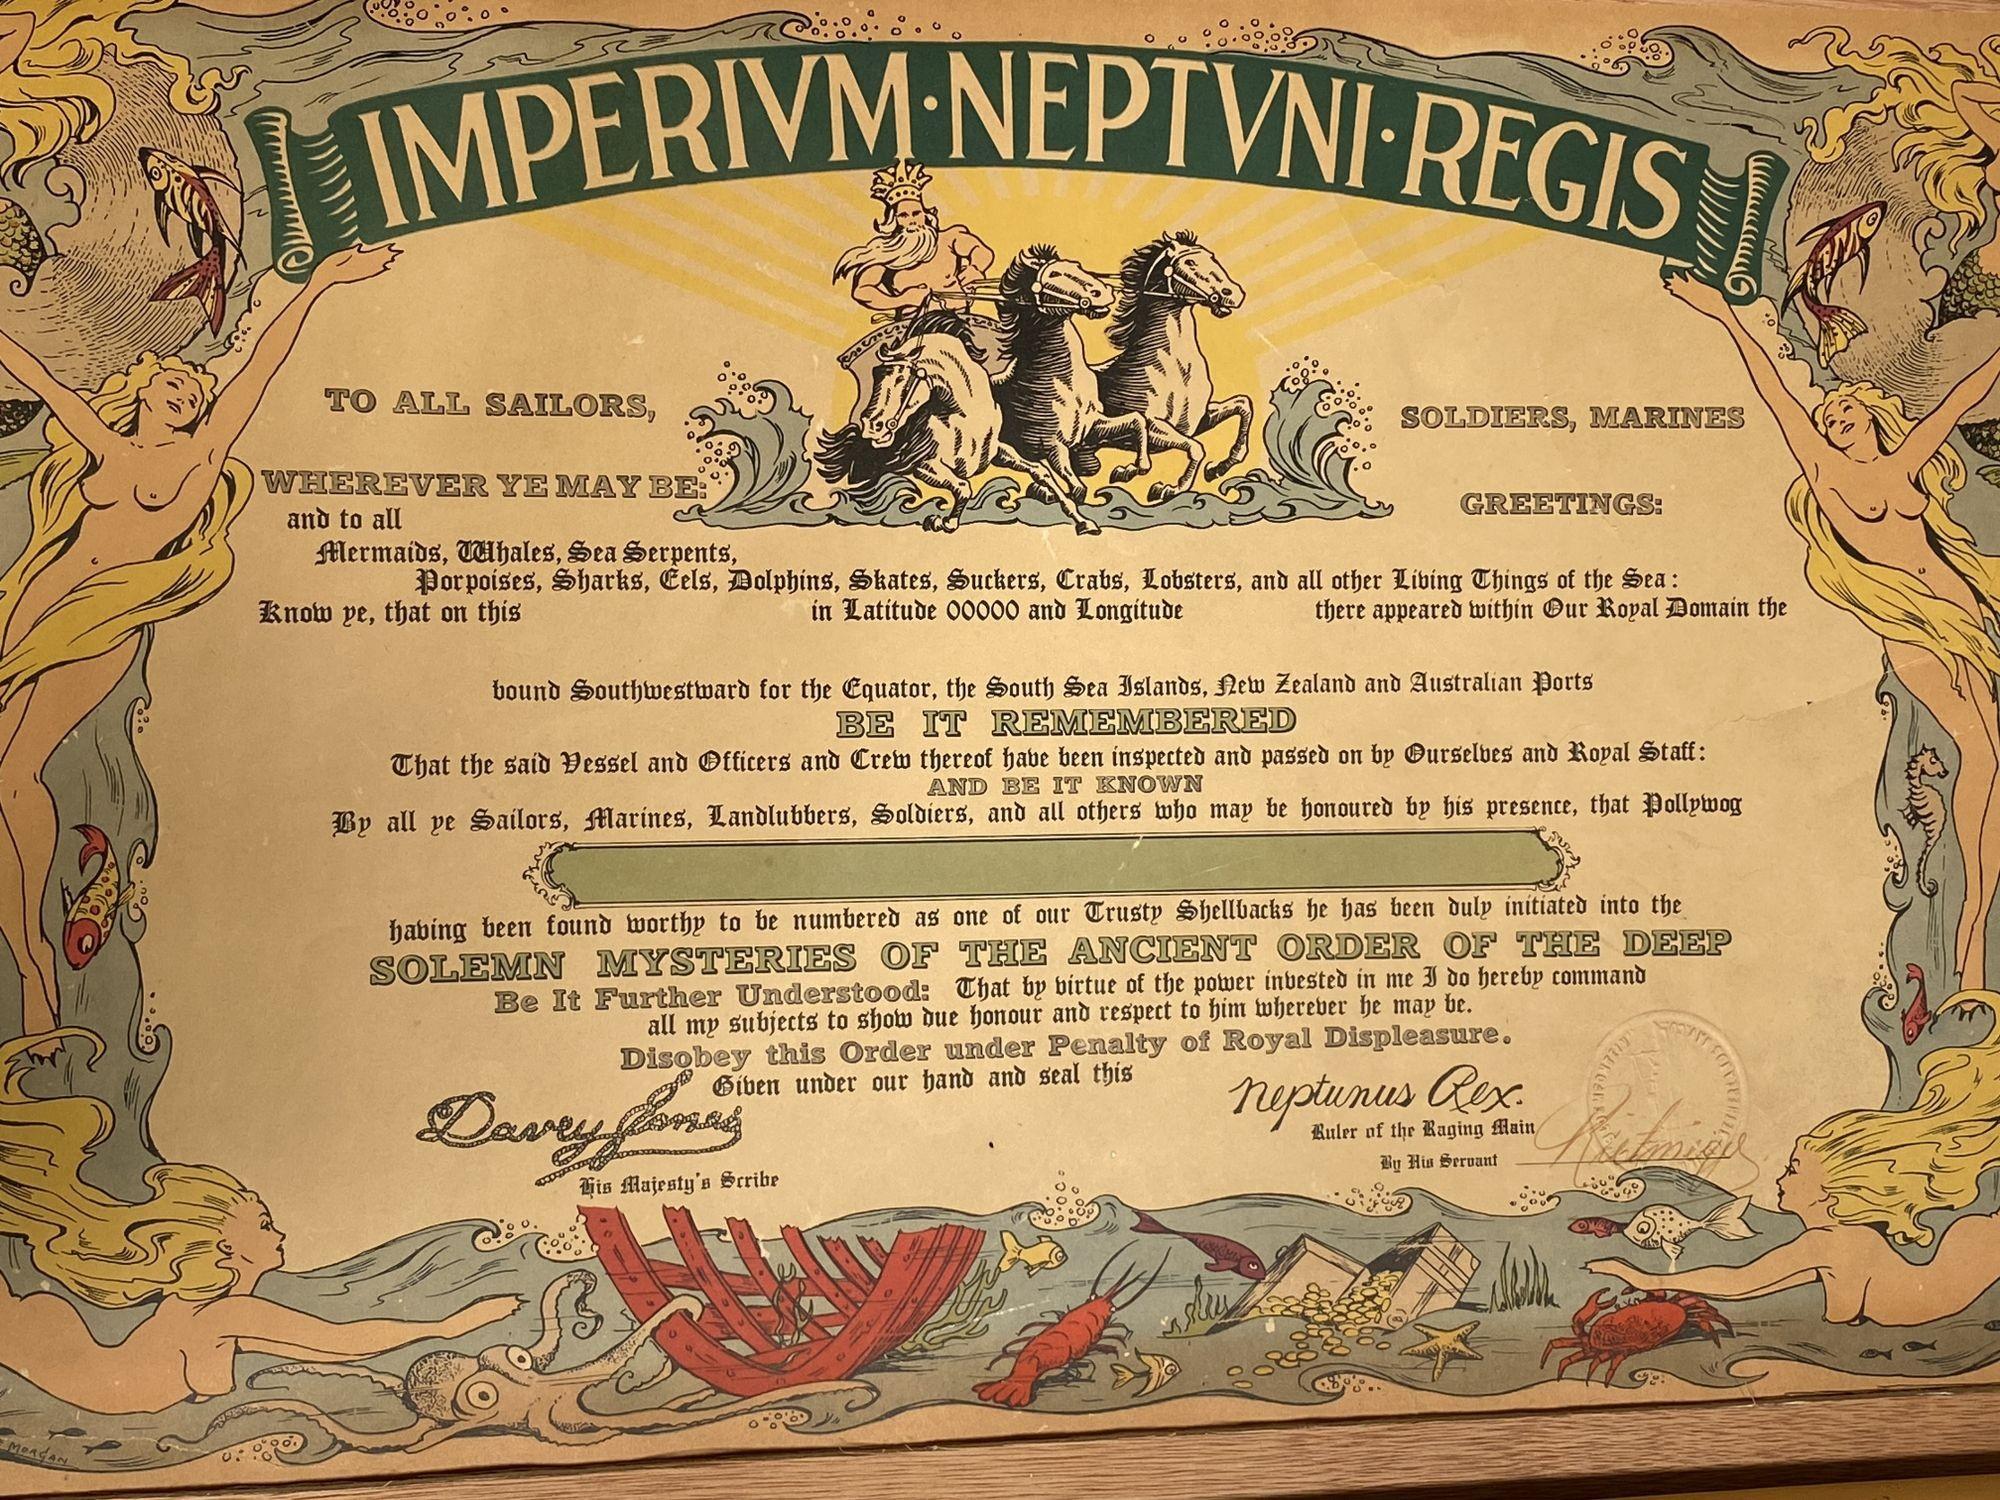 This is a blank Imperium Neptuni Regis certificate. It was given by various navies to its sailors when they crossed the equator for the first time. It measures 20